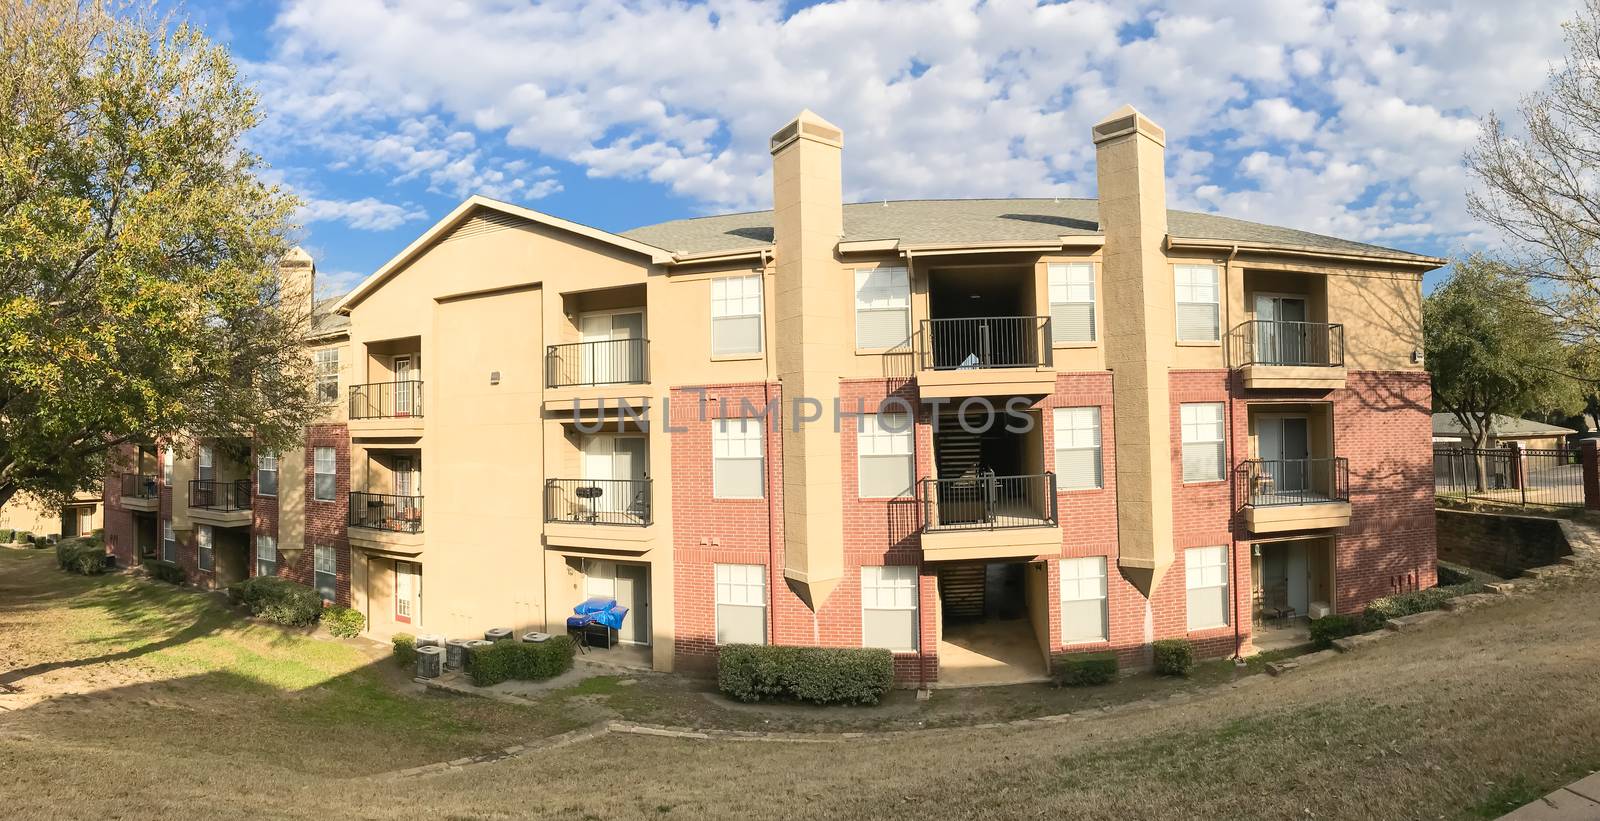 Panorama view apartment building complex with steep backyard and oak trees in suburban Dallas, Texas, USA. Low angle view of multi-stories rental real estate with covered parking at sunset cloud sky